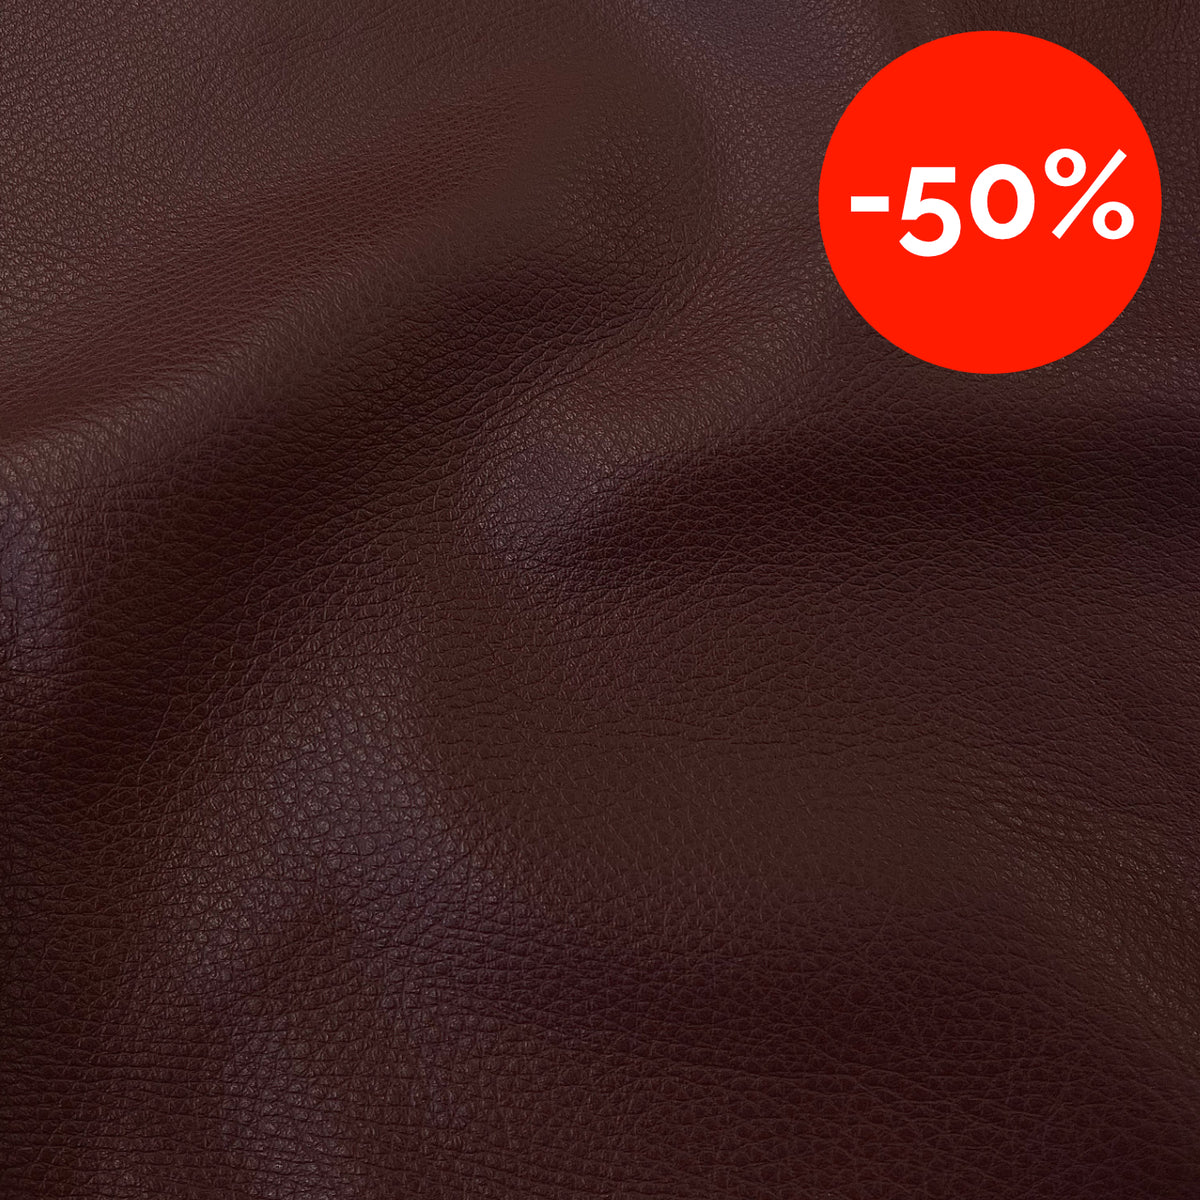 District Leathers Italian Supple Pebbled-Grain Genuine Leather Cow Hide